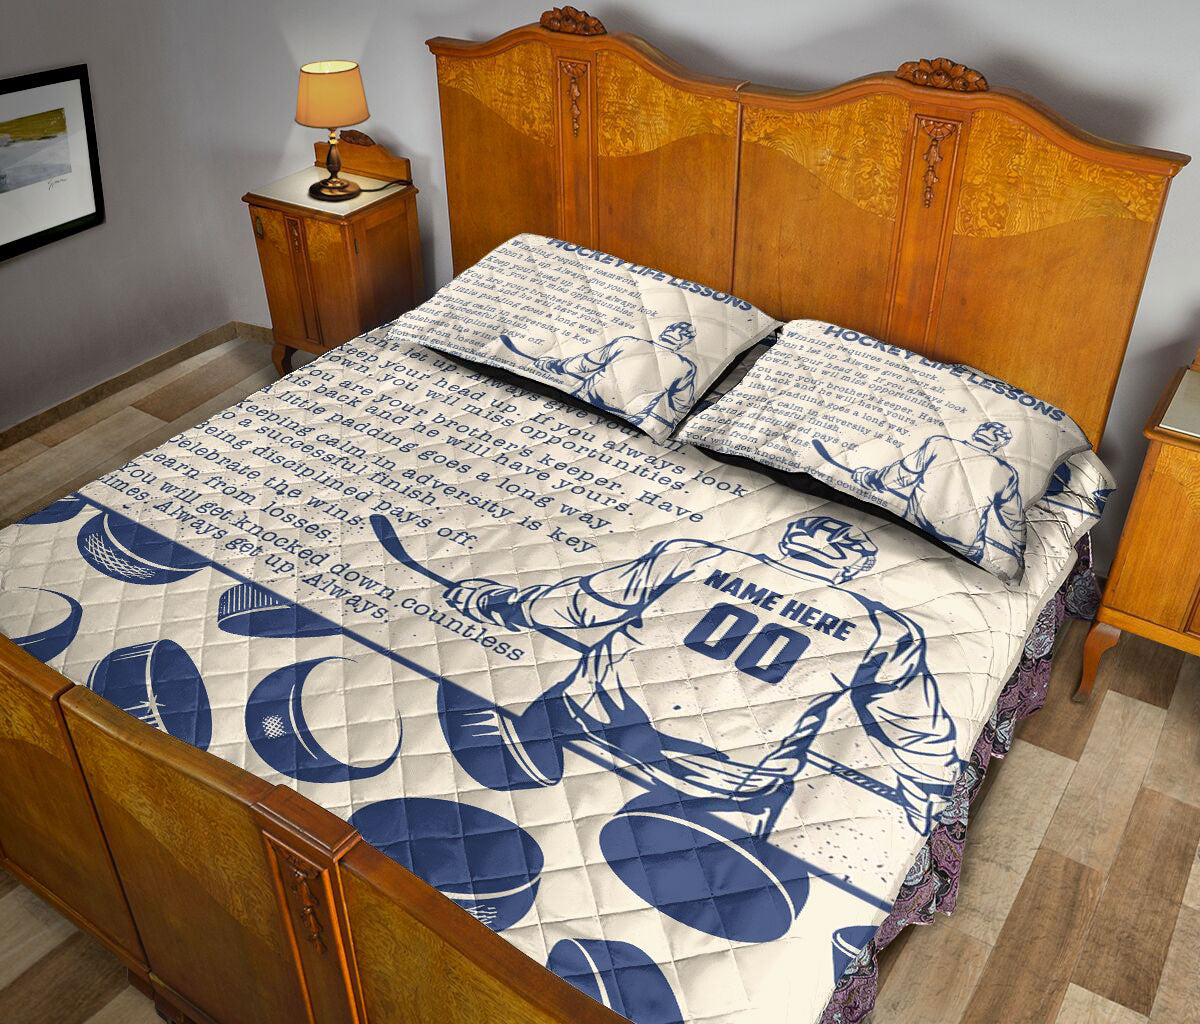 Ohaprints-Quilt-Bed-Set-Pillowcase-Hockey-Life-Lessons-Gift-For-Sport-Lover-Beige-Custom-Personalized-Name-Blanket-Bedspread-Bedding-2274-King (90'' x 100'')